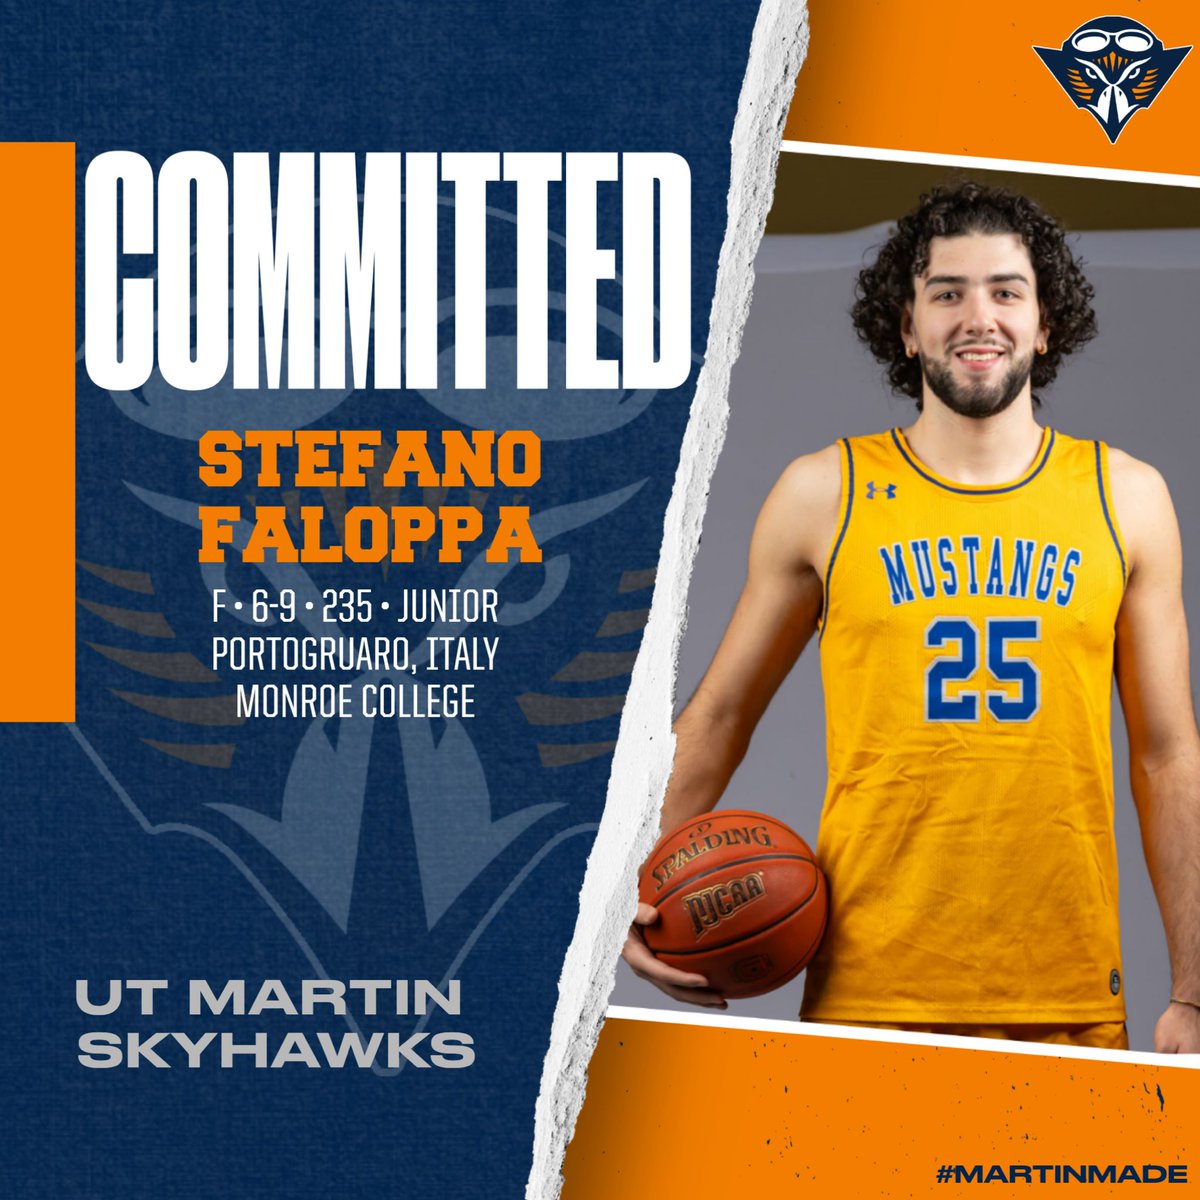 🇮🇹 Stefano Faloppa has committed to UT Martin JUCO transfer with 2 to play. The 6-ft-9 forward avg'd 10.5 PPG and 6.2 RPG for Monroe this season. Third Euro commit from JUCO for coach Jeremy Shulman